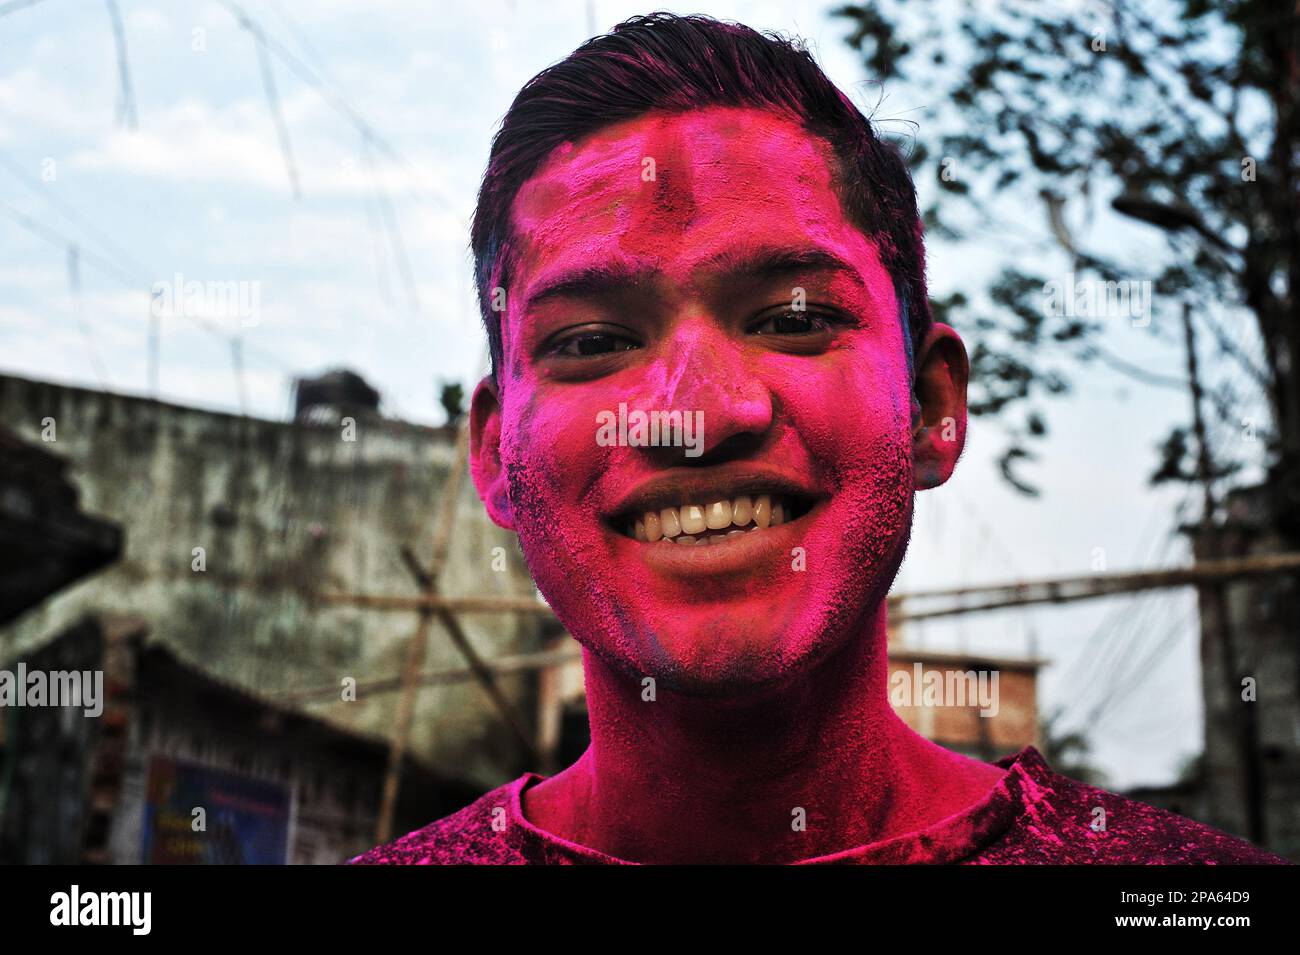 Holi celebrations in Dhaka. Holi, also known as the Festival of Colours, Love and Spring, is one of the most popular and significant festivals in Hinduism. It celebrates the eternal and divine love of the god Radha and Krishna. Dhaka, Bangladesh. Stock Photo